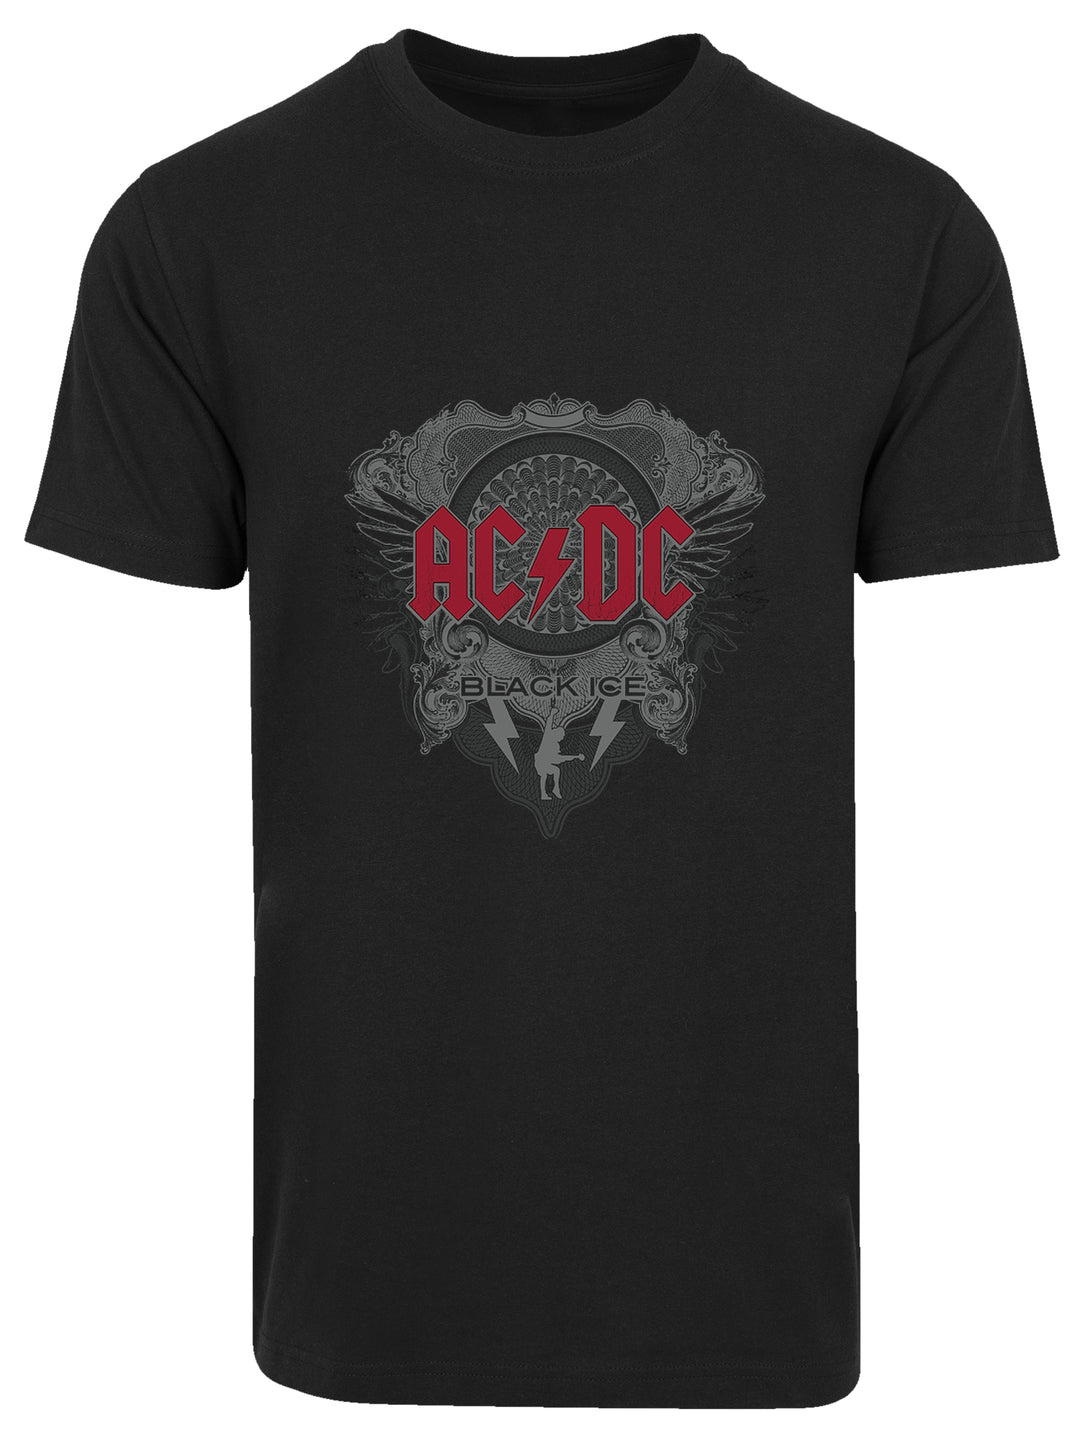 AC/DC Black Ice Red Round Neck T-Shirt - Bold Rock 'n' Roll Style Tailored for Comfort